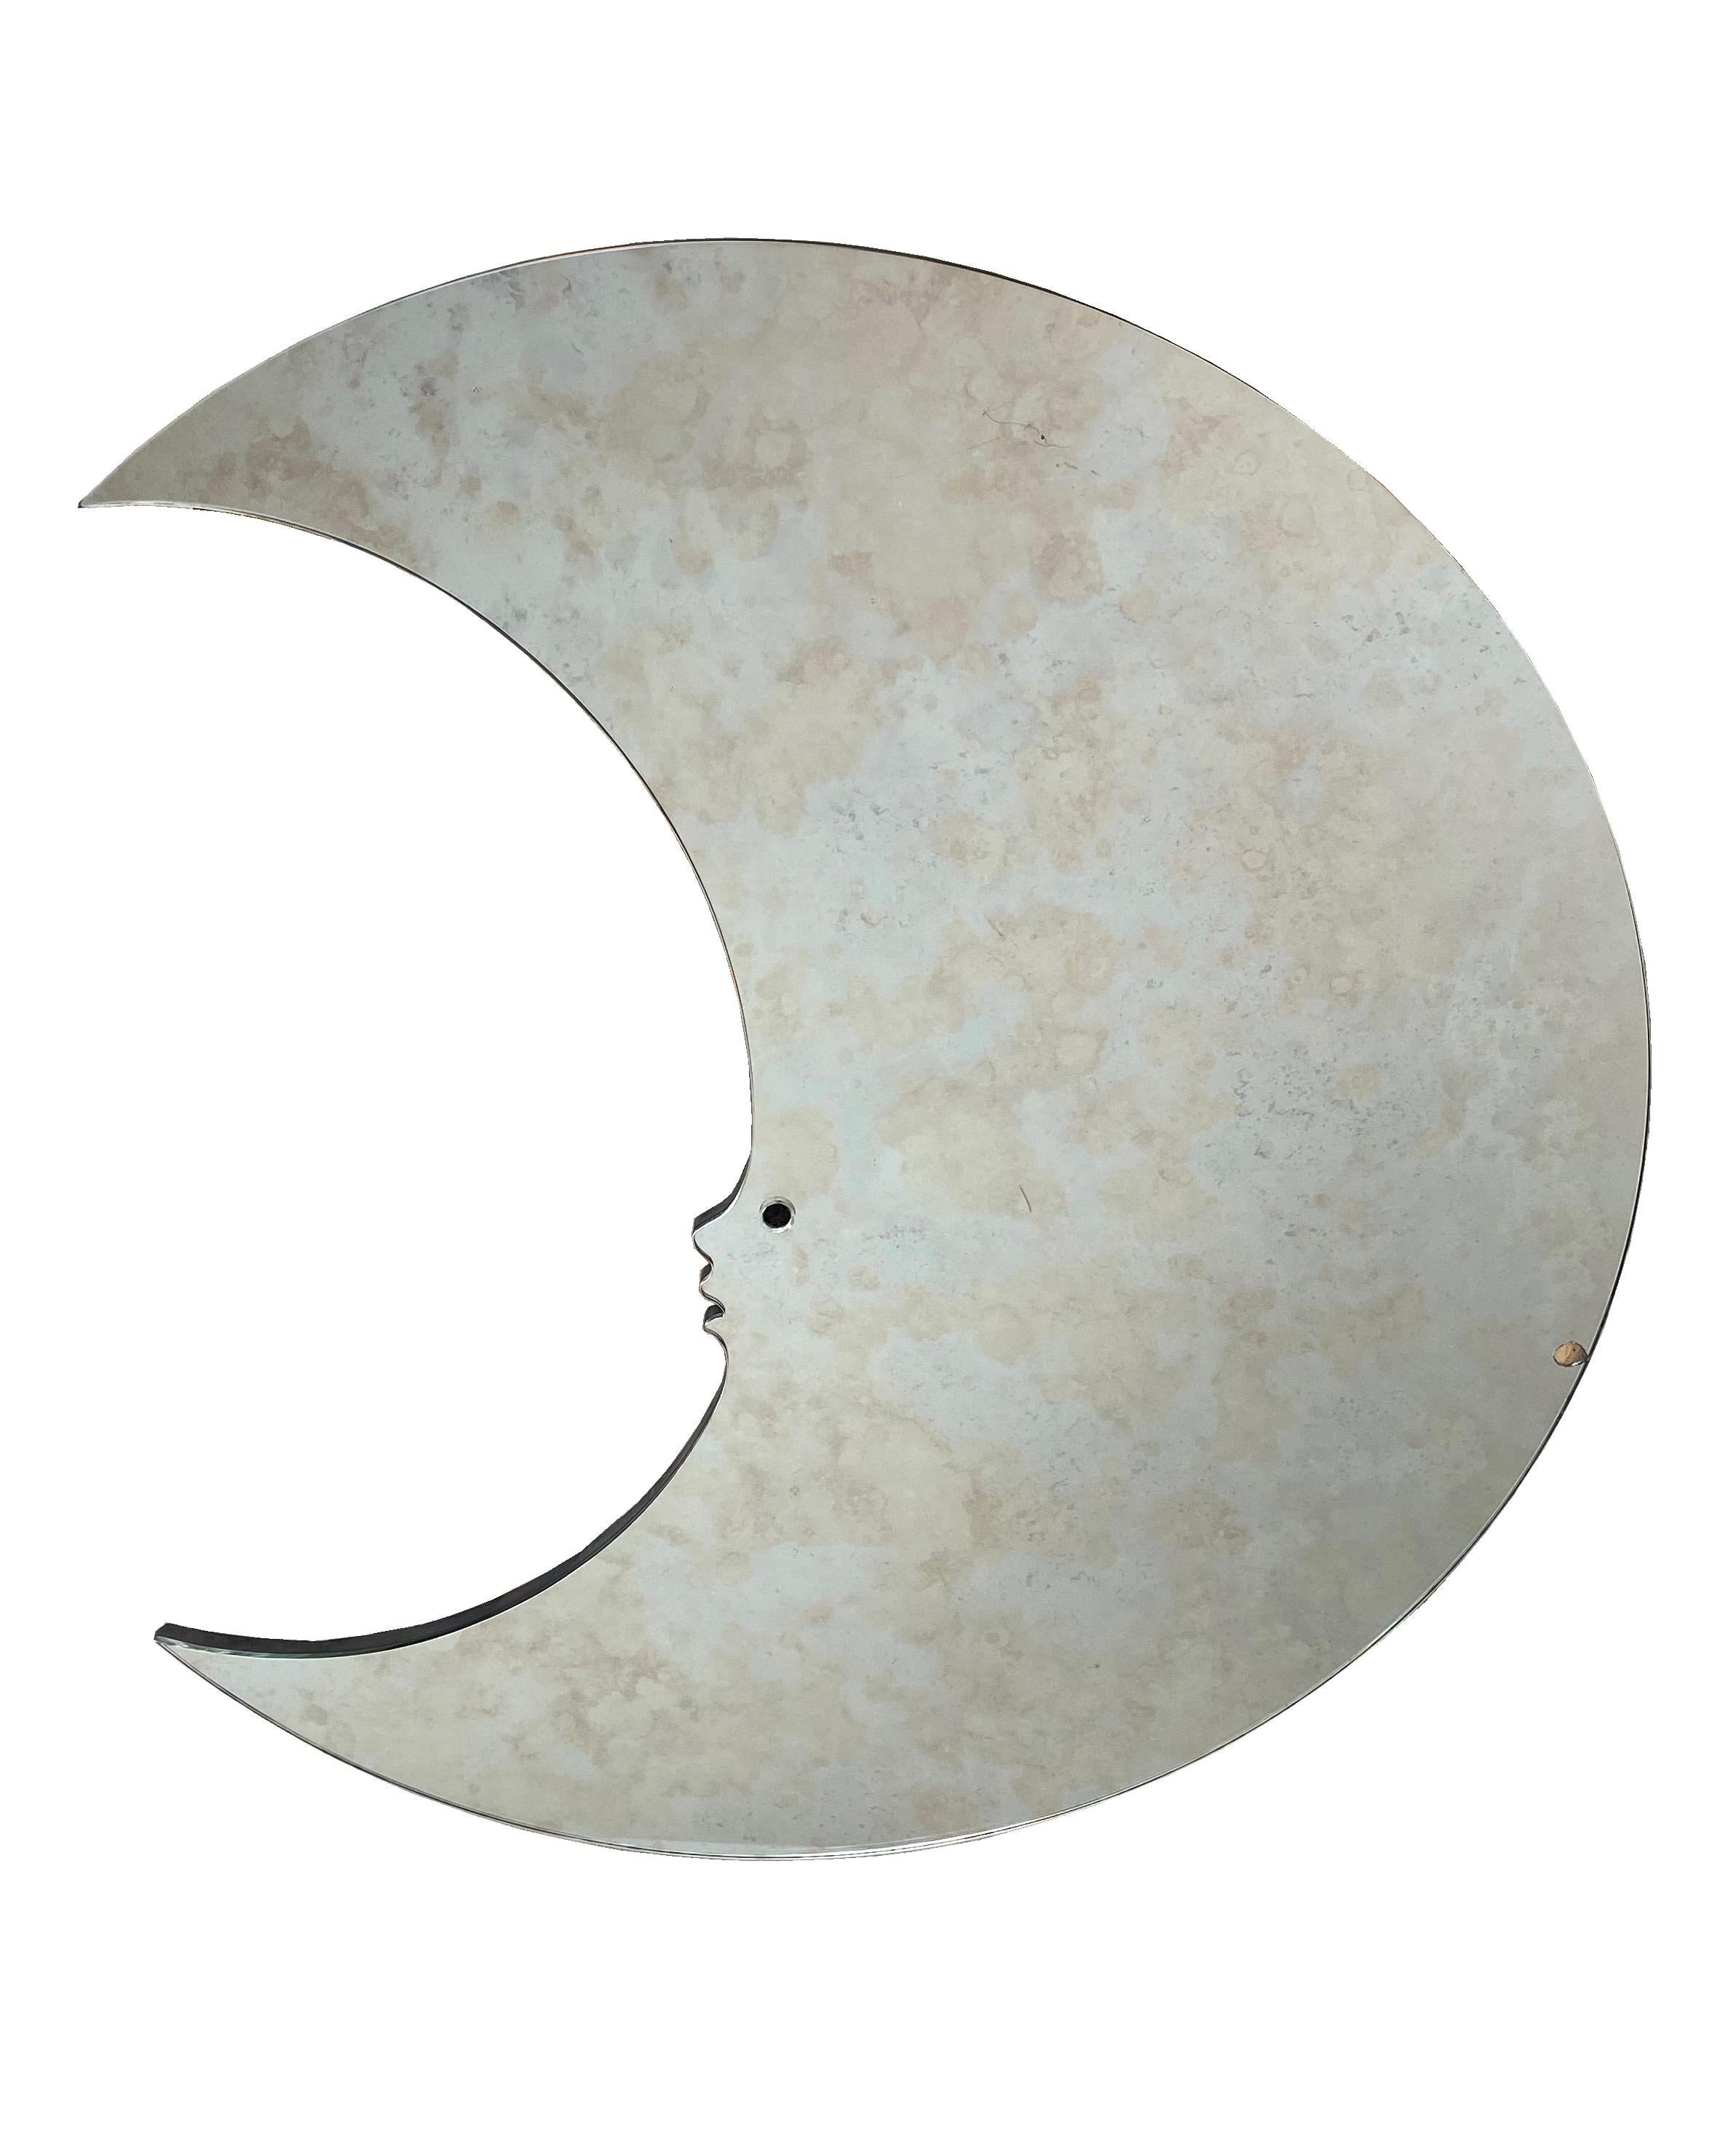 Big wall mirror in the shape of crescent moon with face. A typical example of the Italian design during the 1970s.